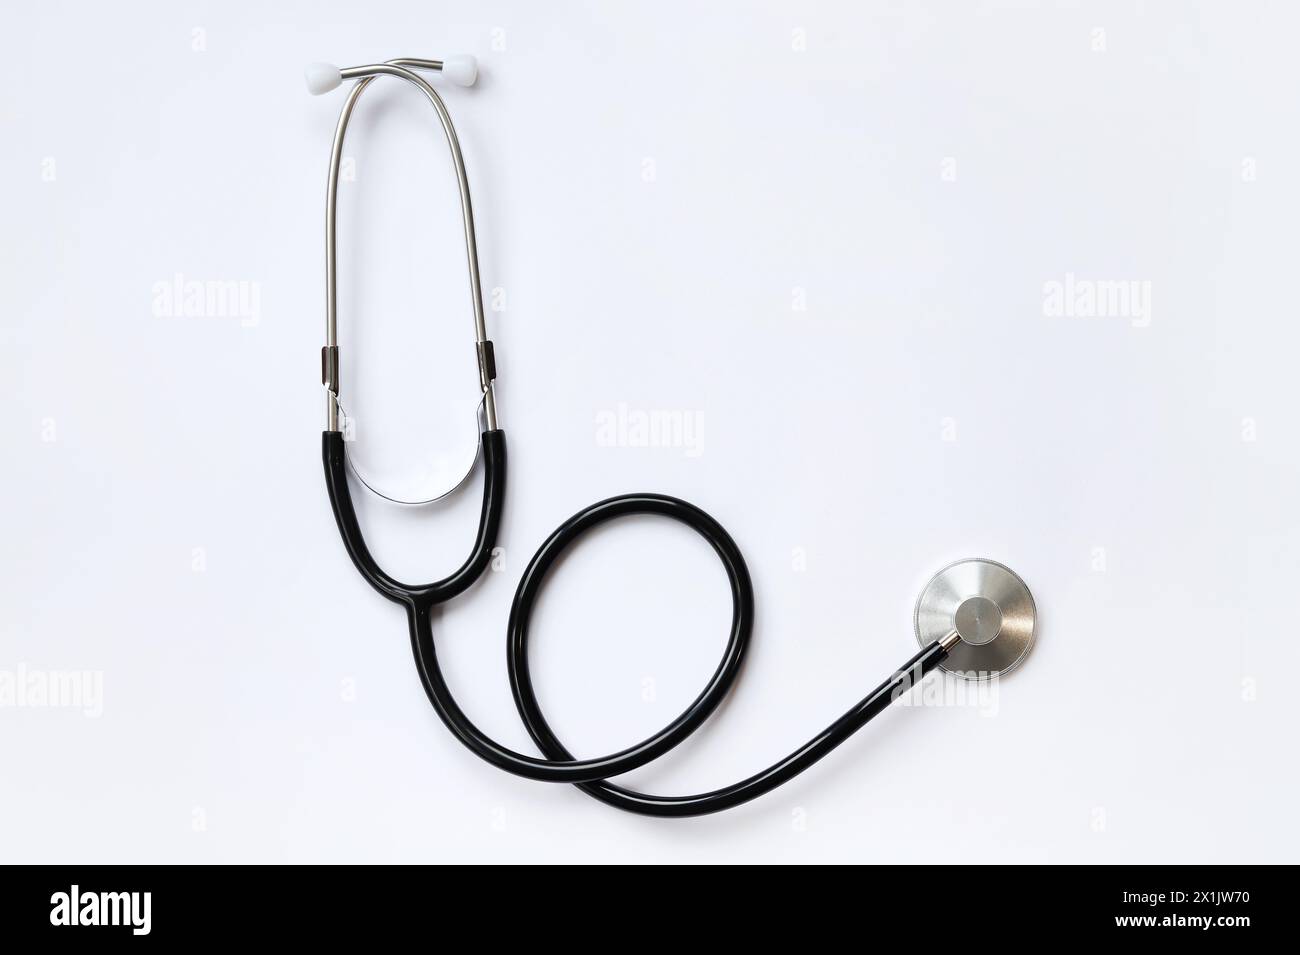 Stethoscope on a white background, top view. Medical instrument. Cardiology and medicine concept, healthcare. Auscultation device Stock Photo